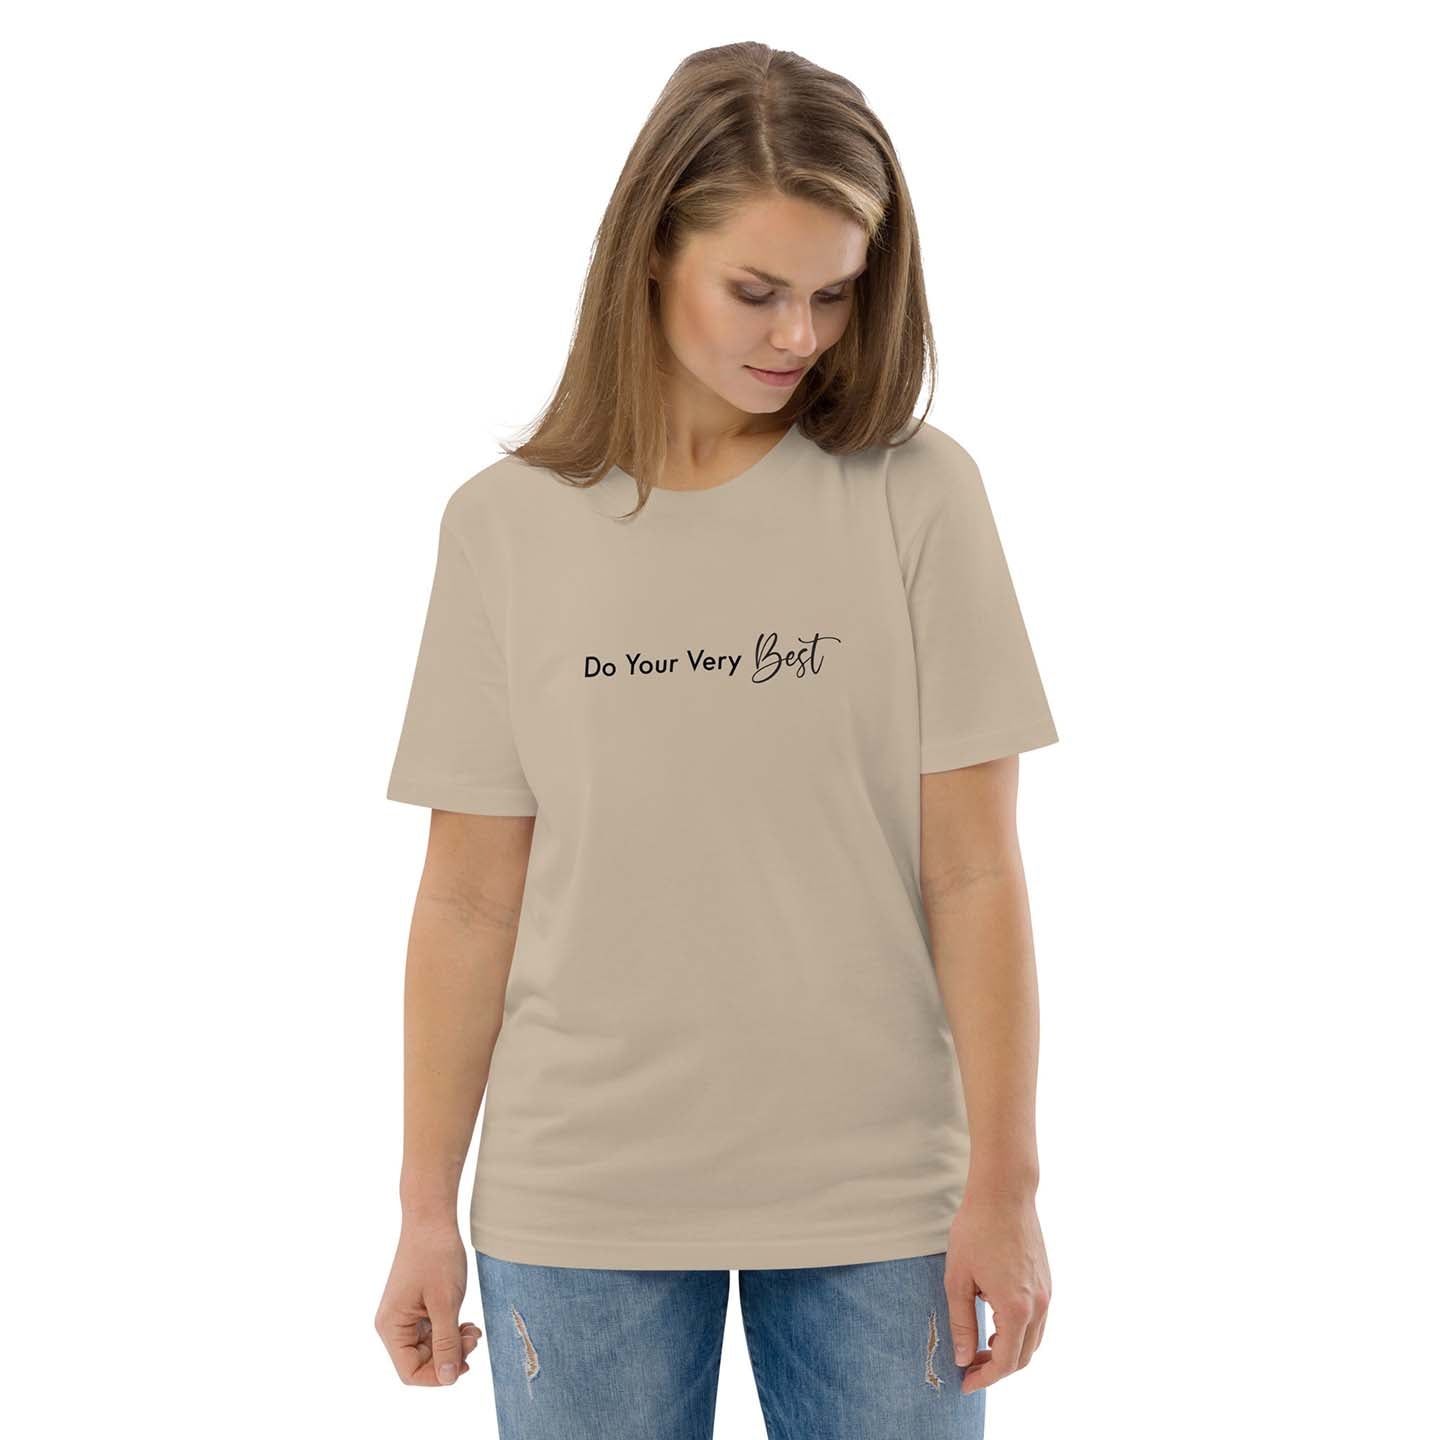 Women beige 100% organic cotton t-shirt with motivational quote, "Do Your Very Best."